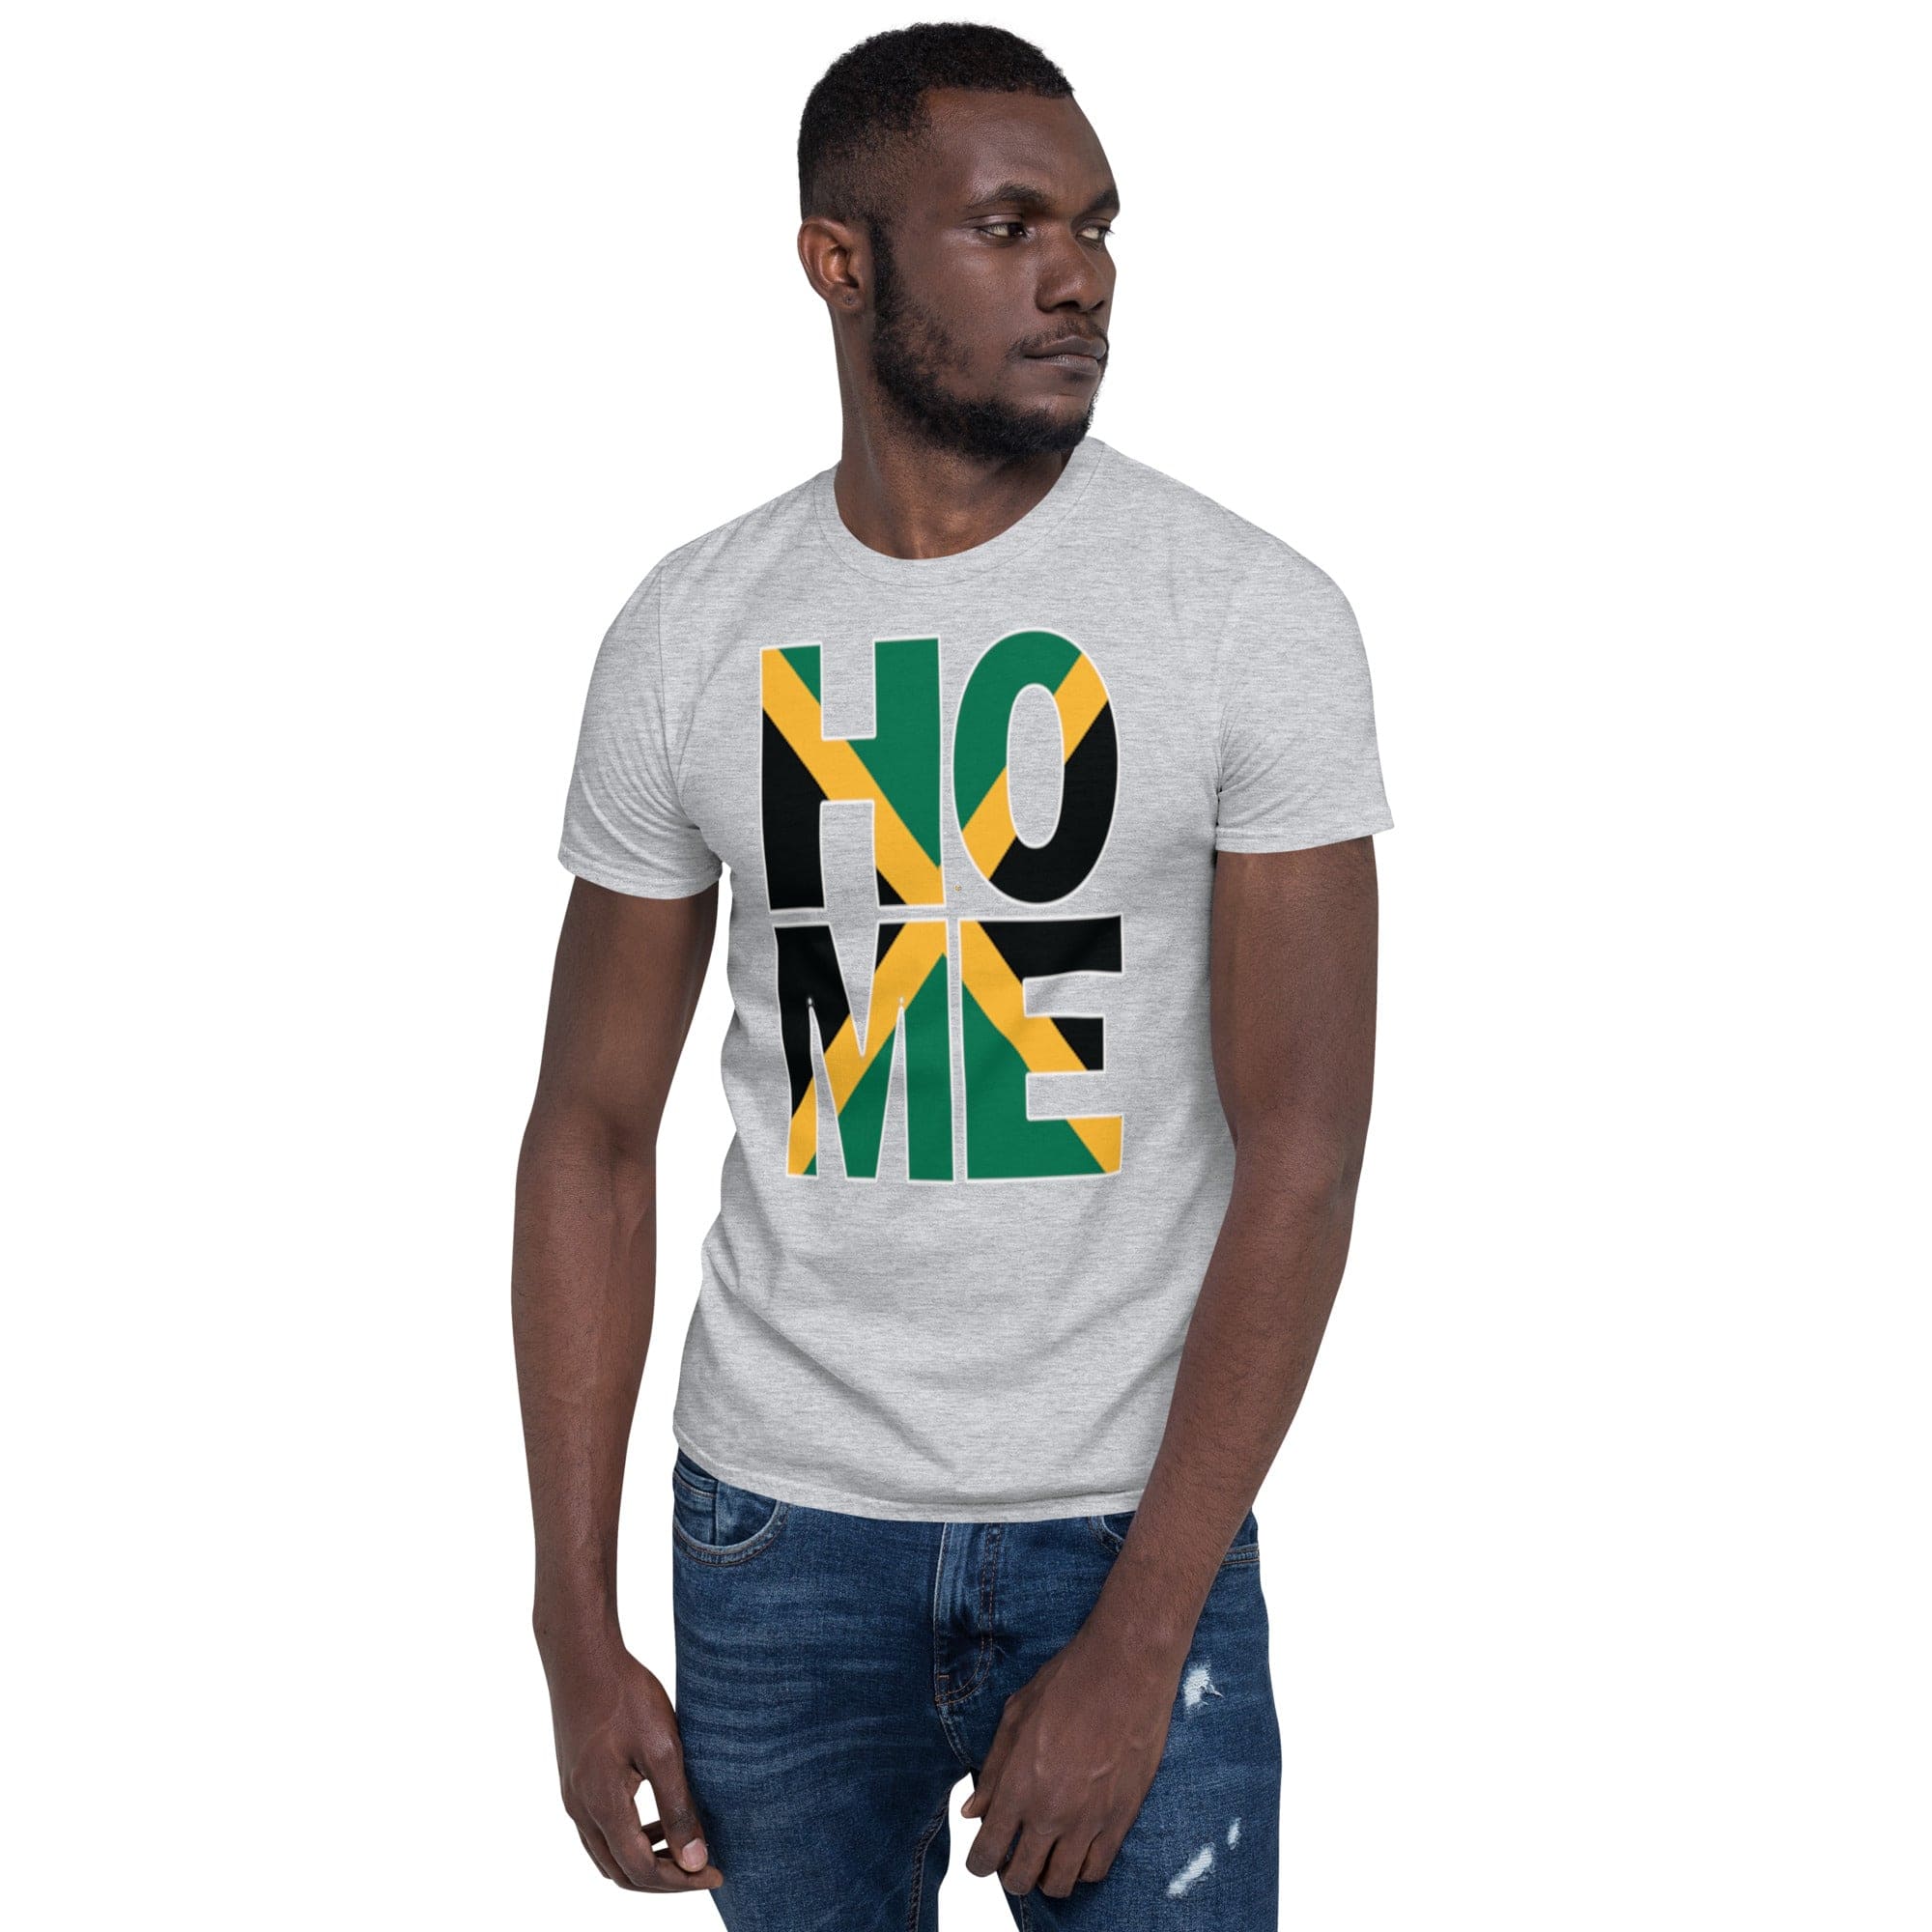 Jamaica flag design in the words HOME on a sport grey color shirt on the front of a black man.